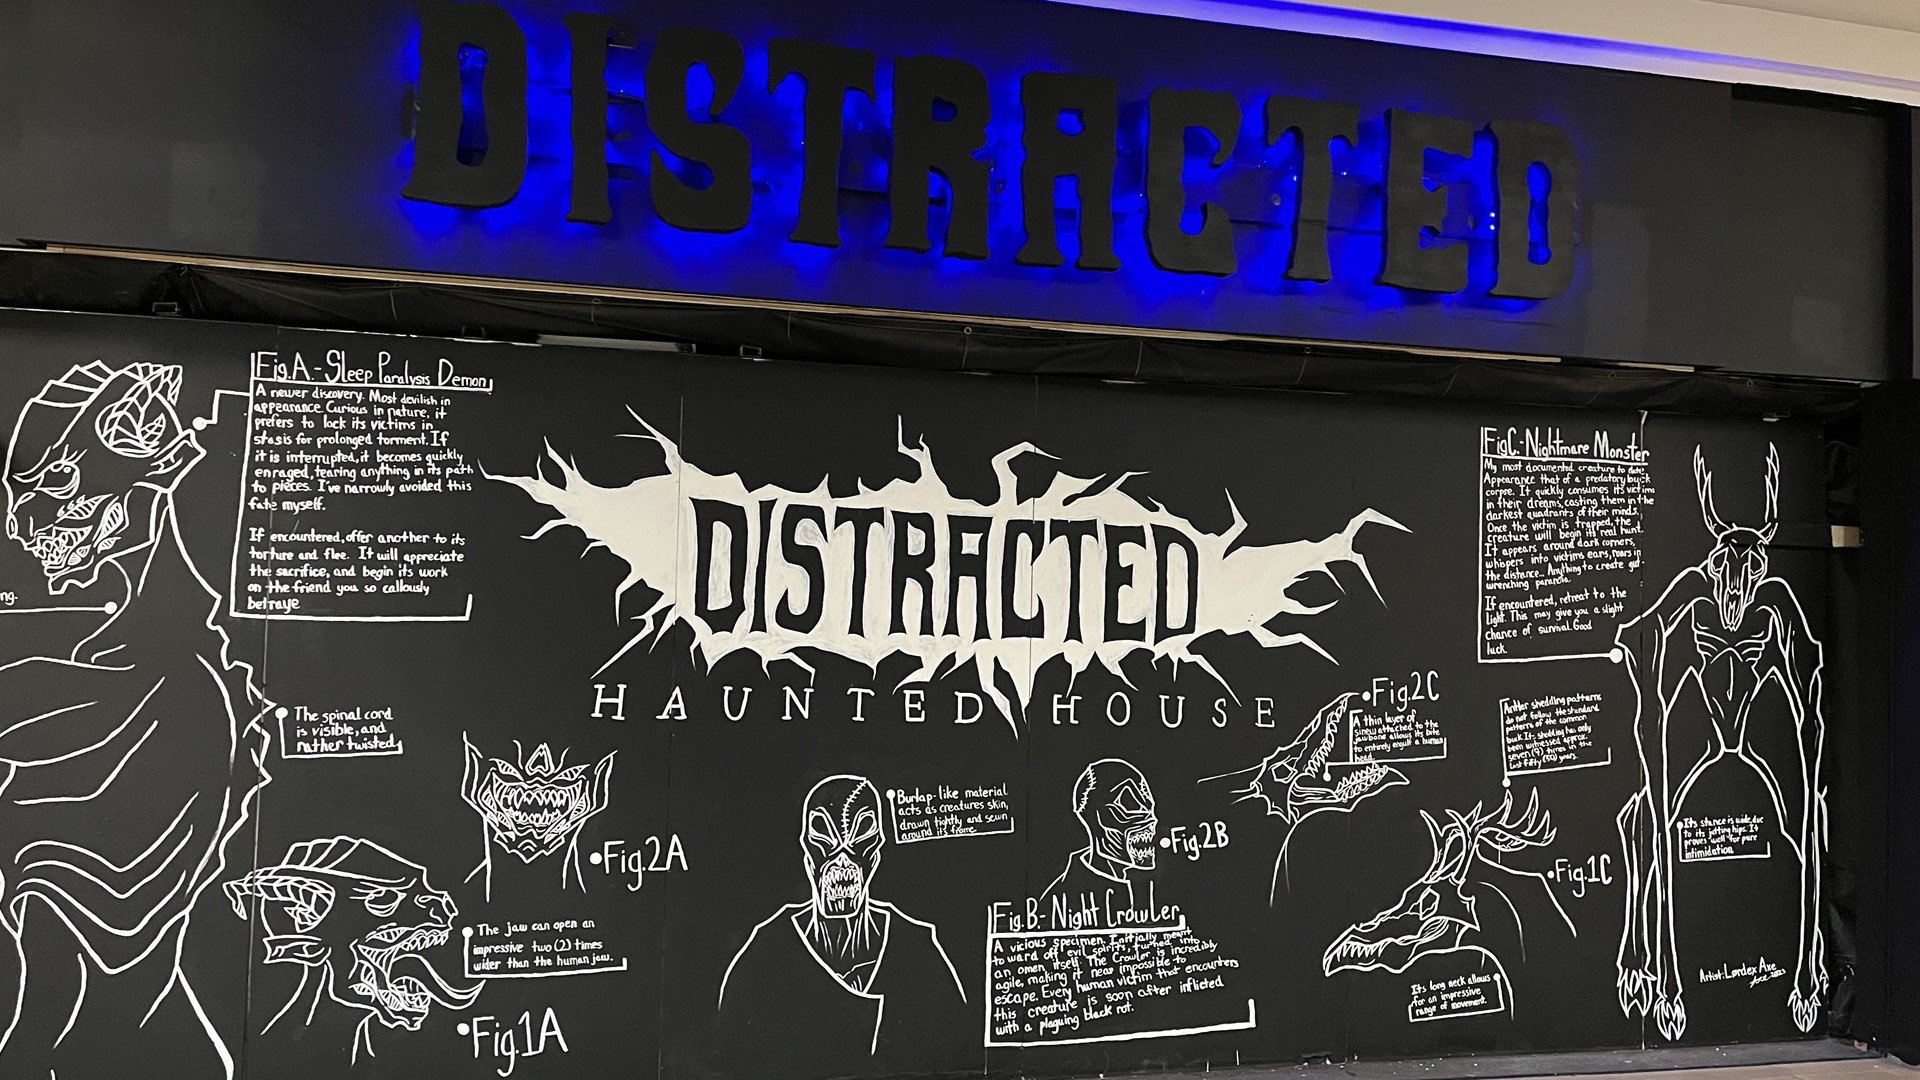 Distracted Haunted House's winter and Valentine's Day-themed experience will be open Friday and Saturday from 7-11:30 p.m. inside Bowling Green's Woodland Mall.